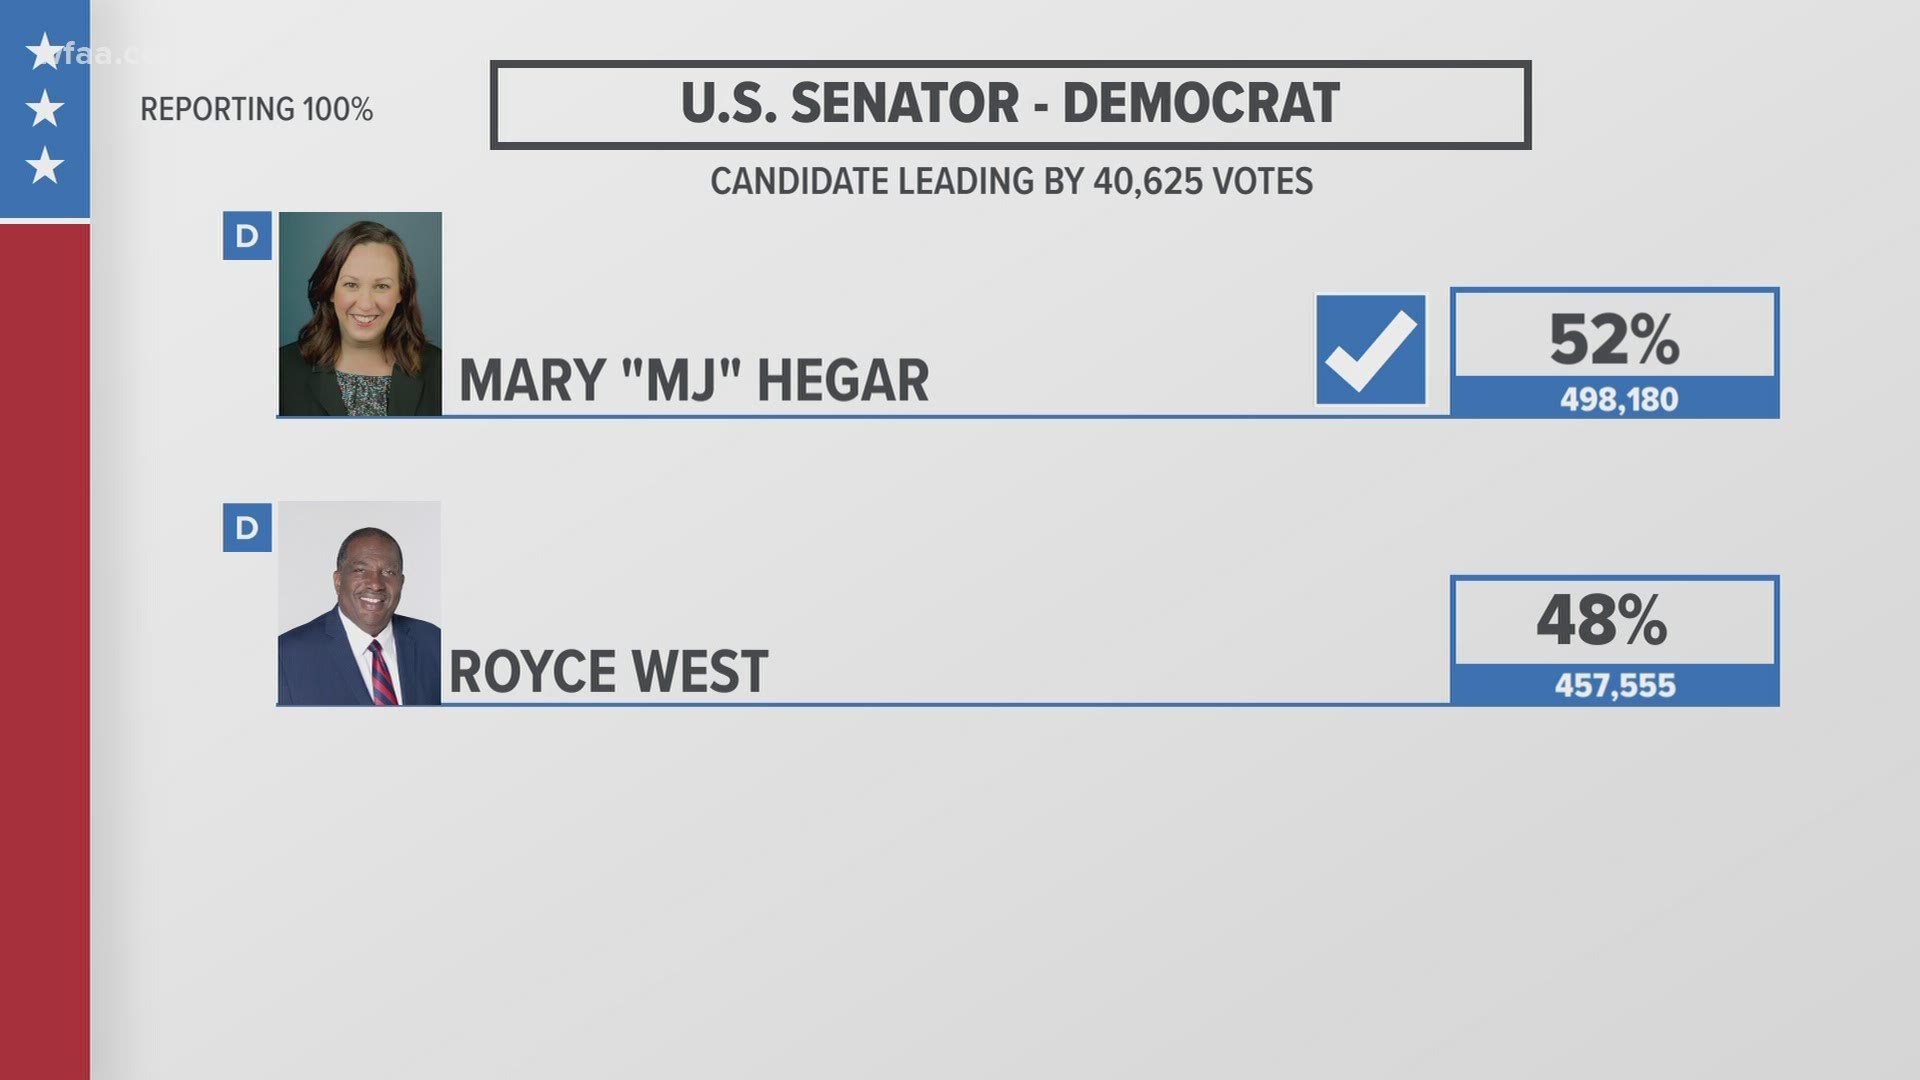 The Democratic race for U.S. Senate between Mary "MJ" Hegar and state Sen. Royce West was a fairly close one, but has been called.